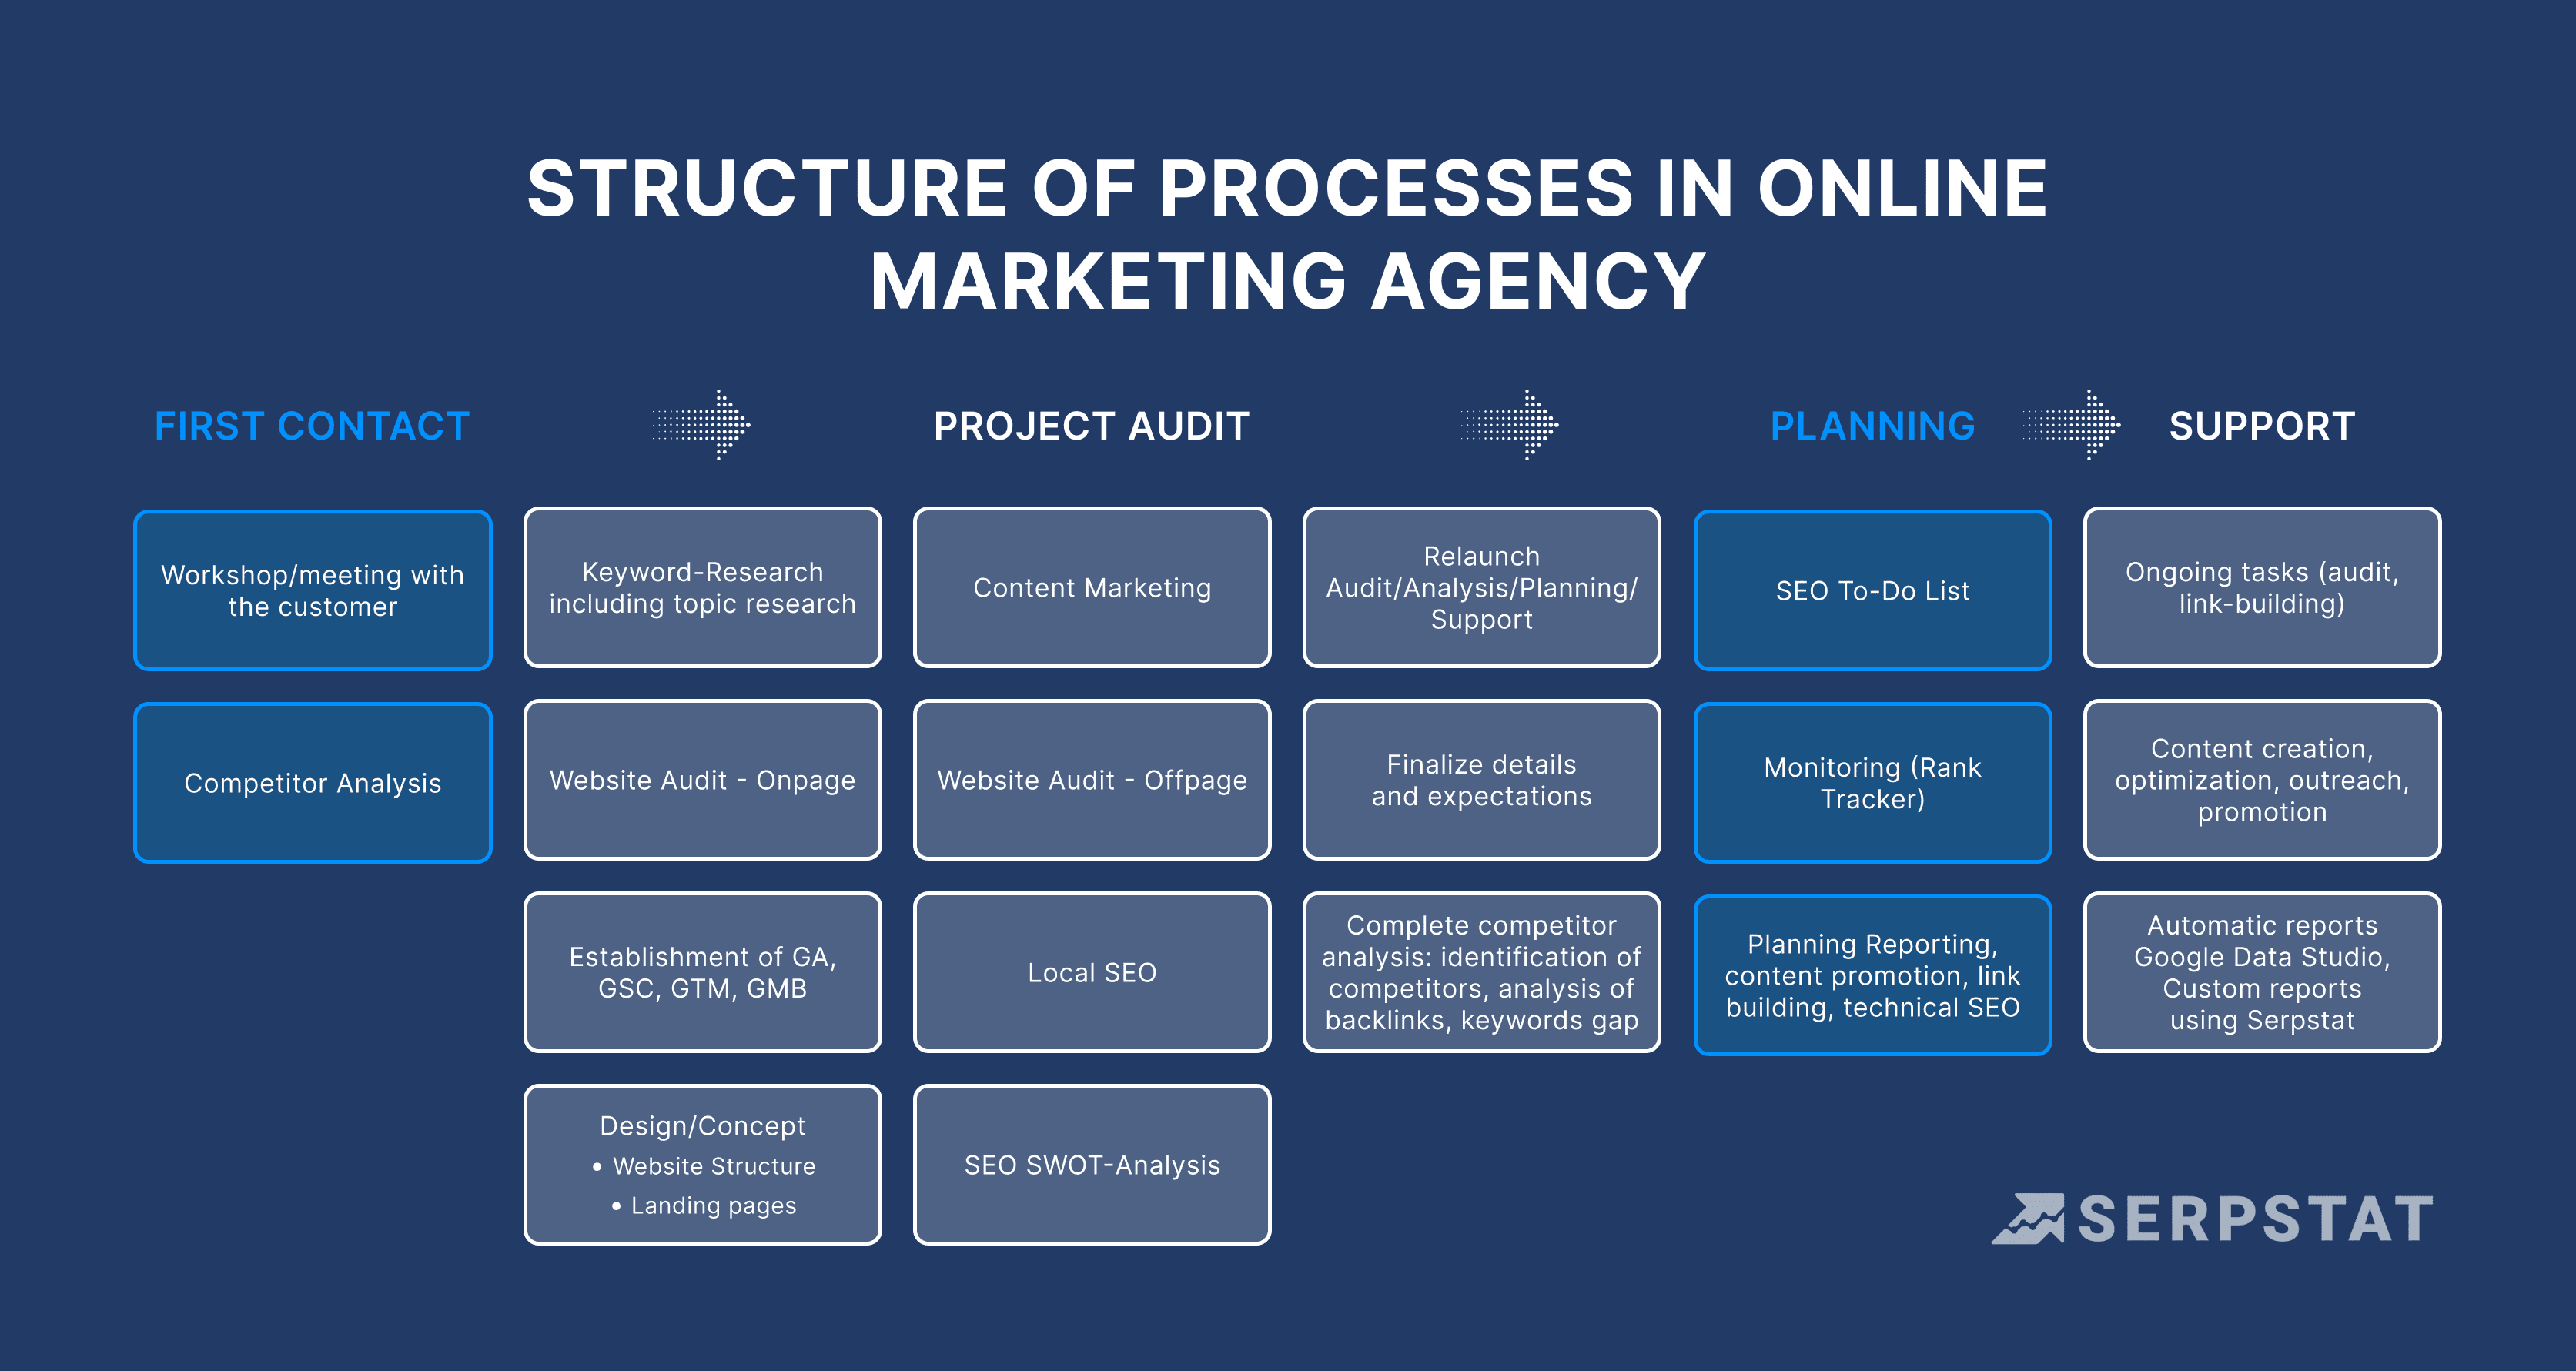 Processes in online marketing agency